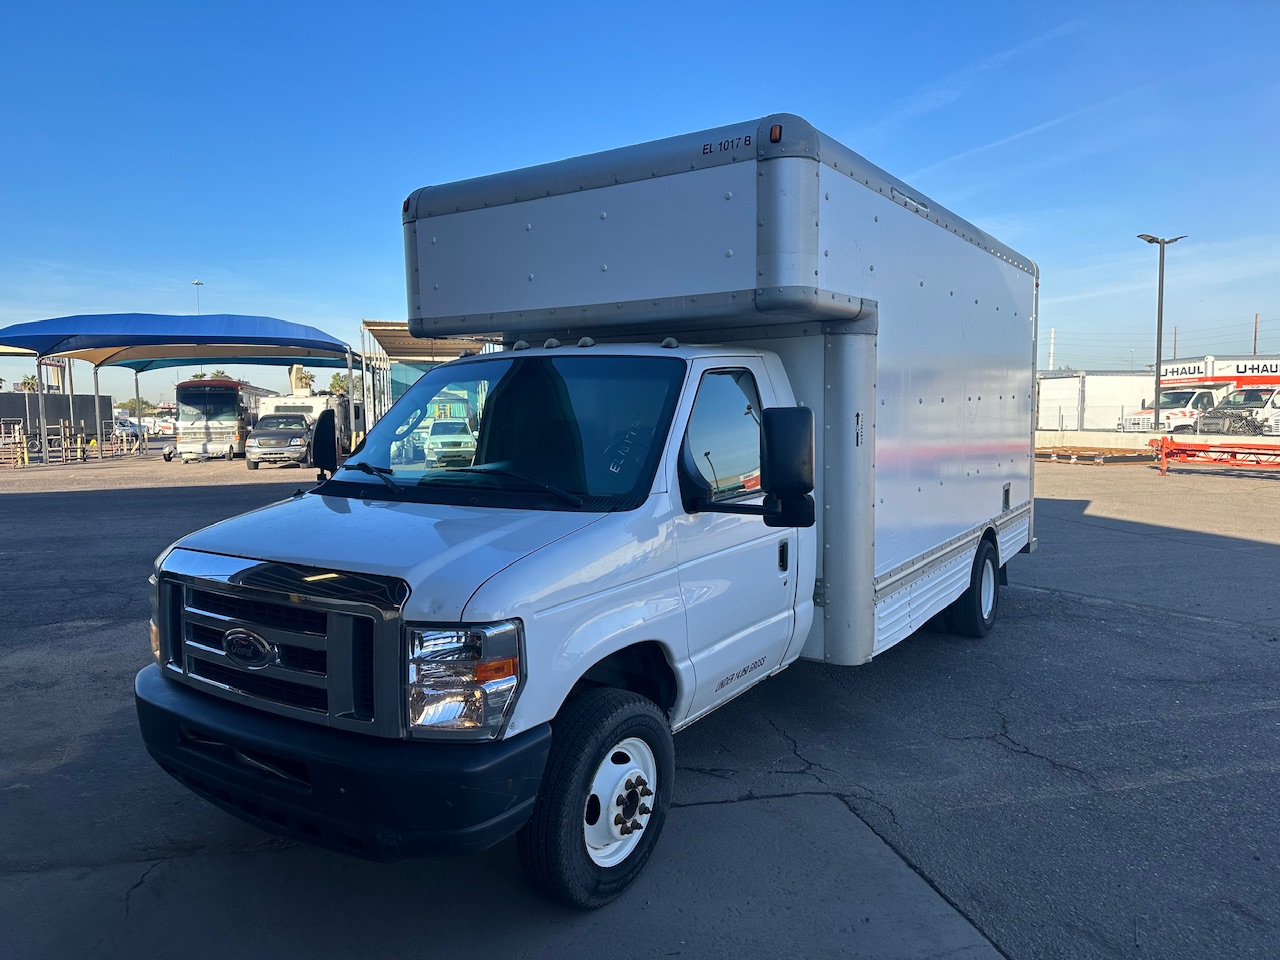 Used 2008 17 ' Box Truck for sale